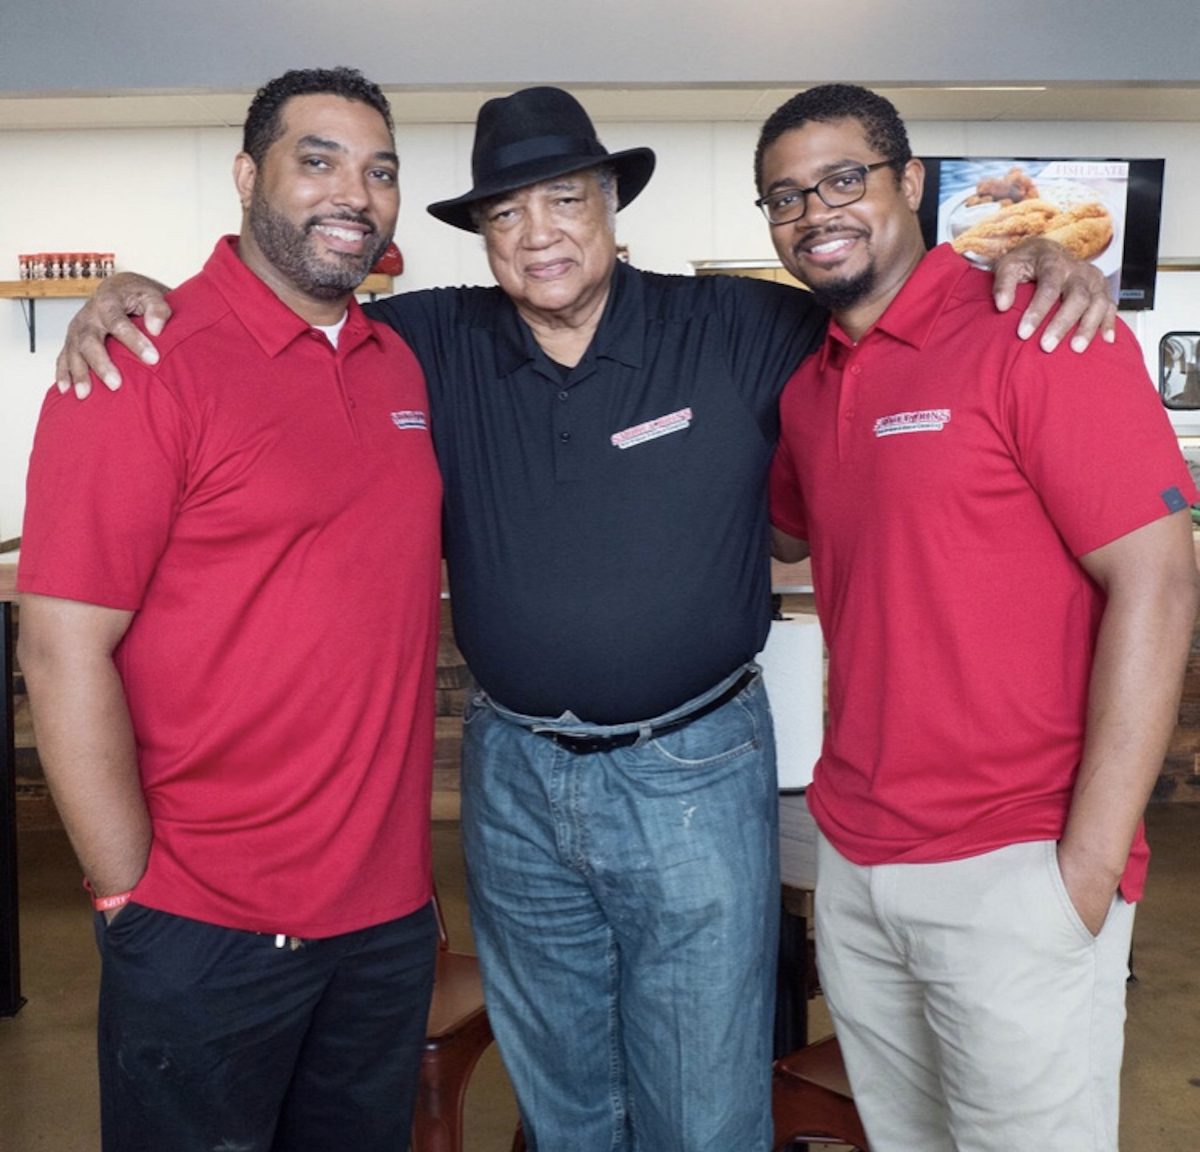 Smokey John’s Bar-B-Que owners Brent and Juan with their father 